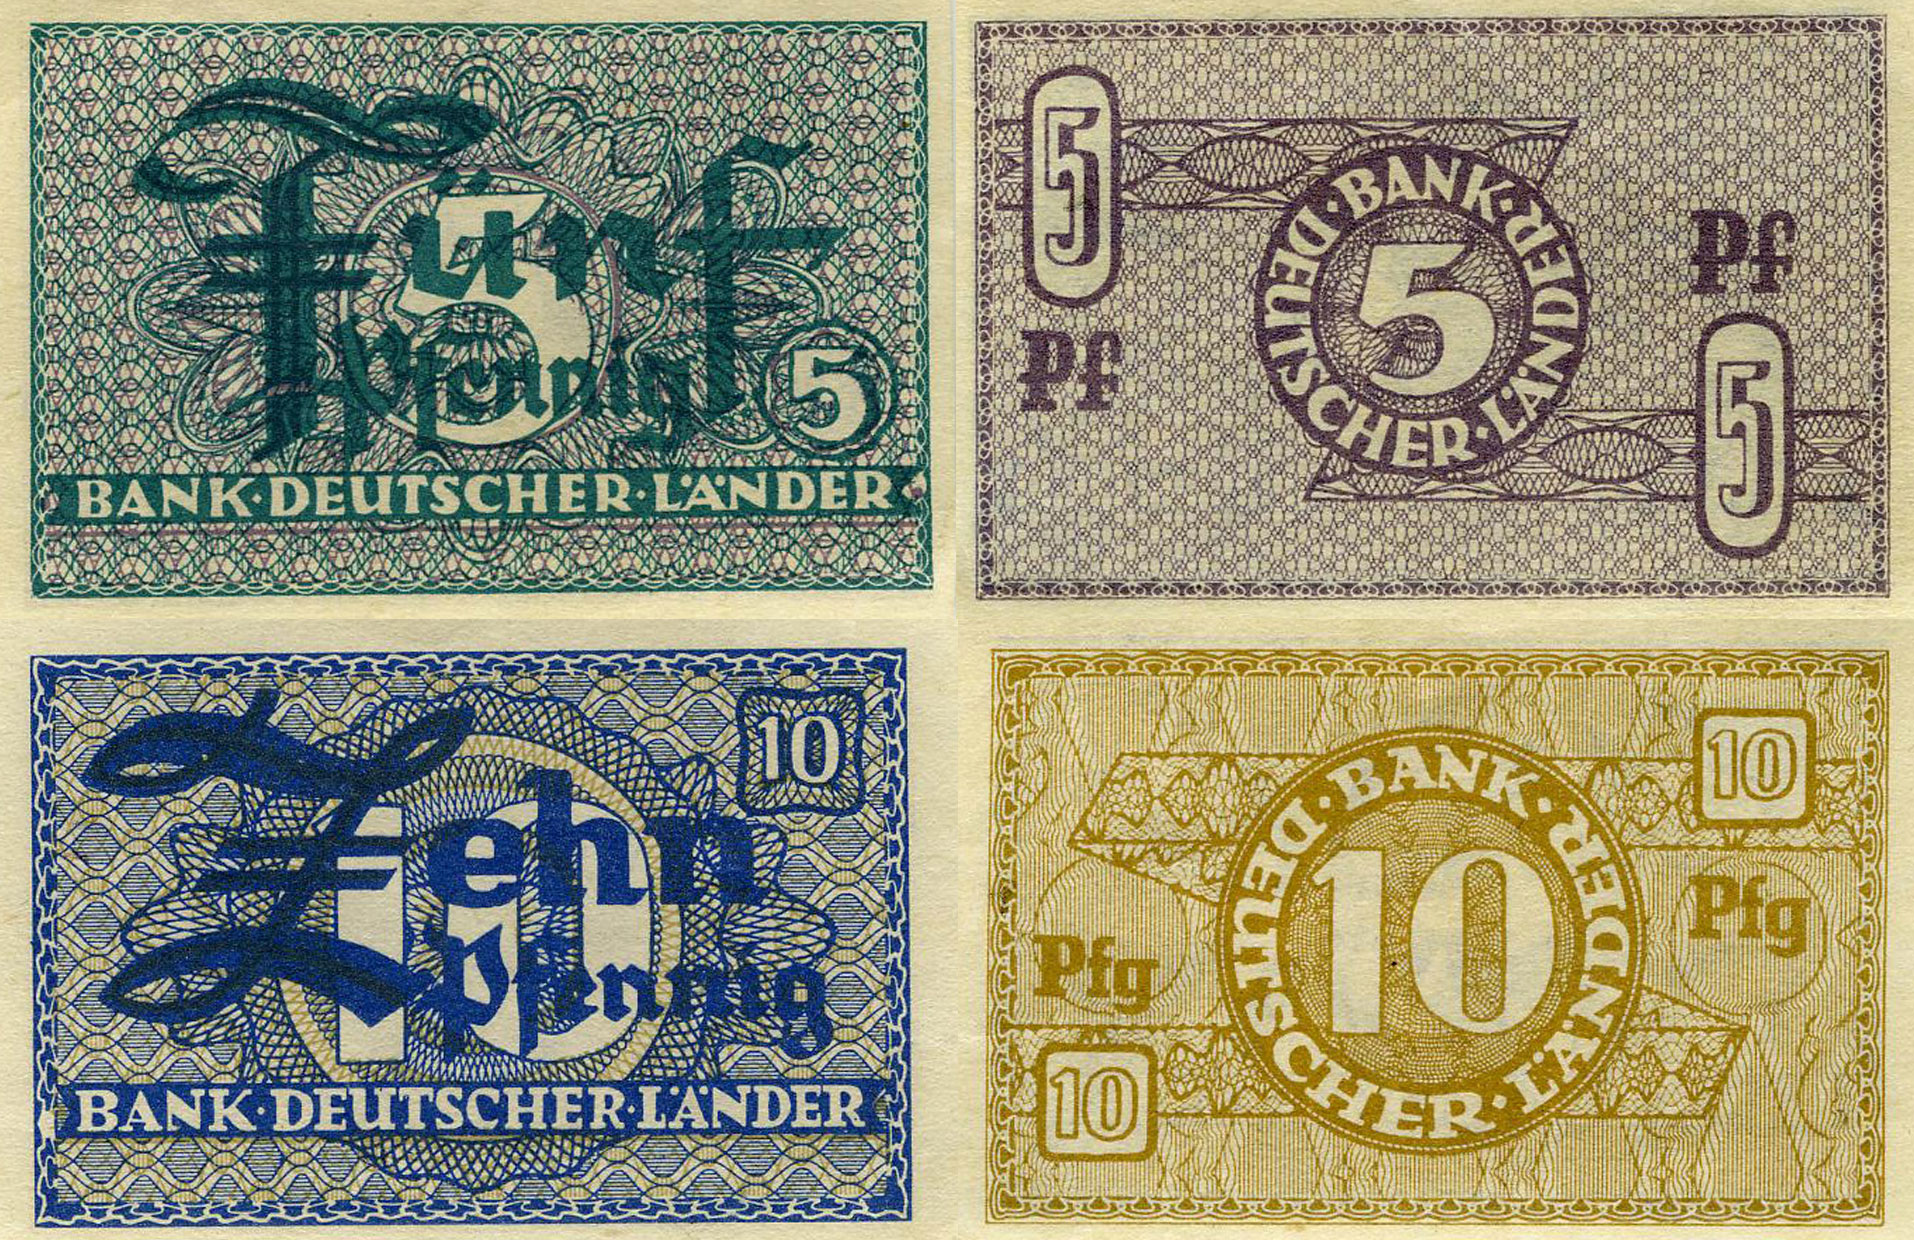 Small bank notes, 5 and 10 Pfennig, 1948 © DHM